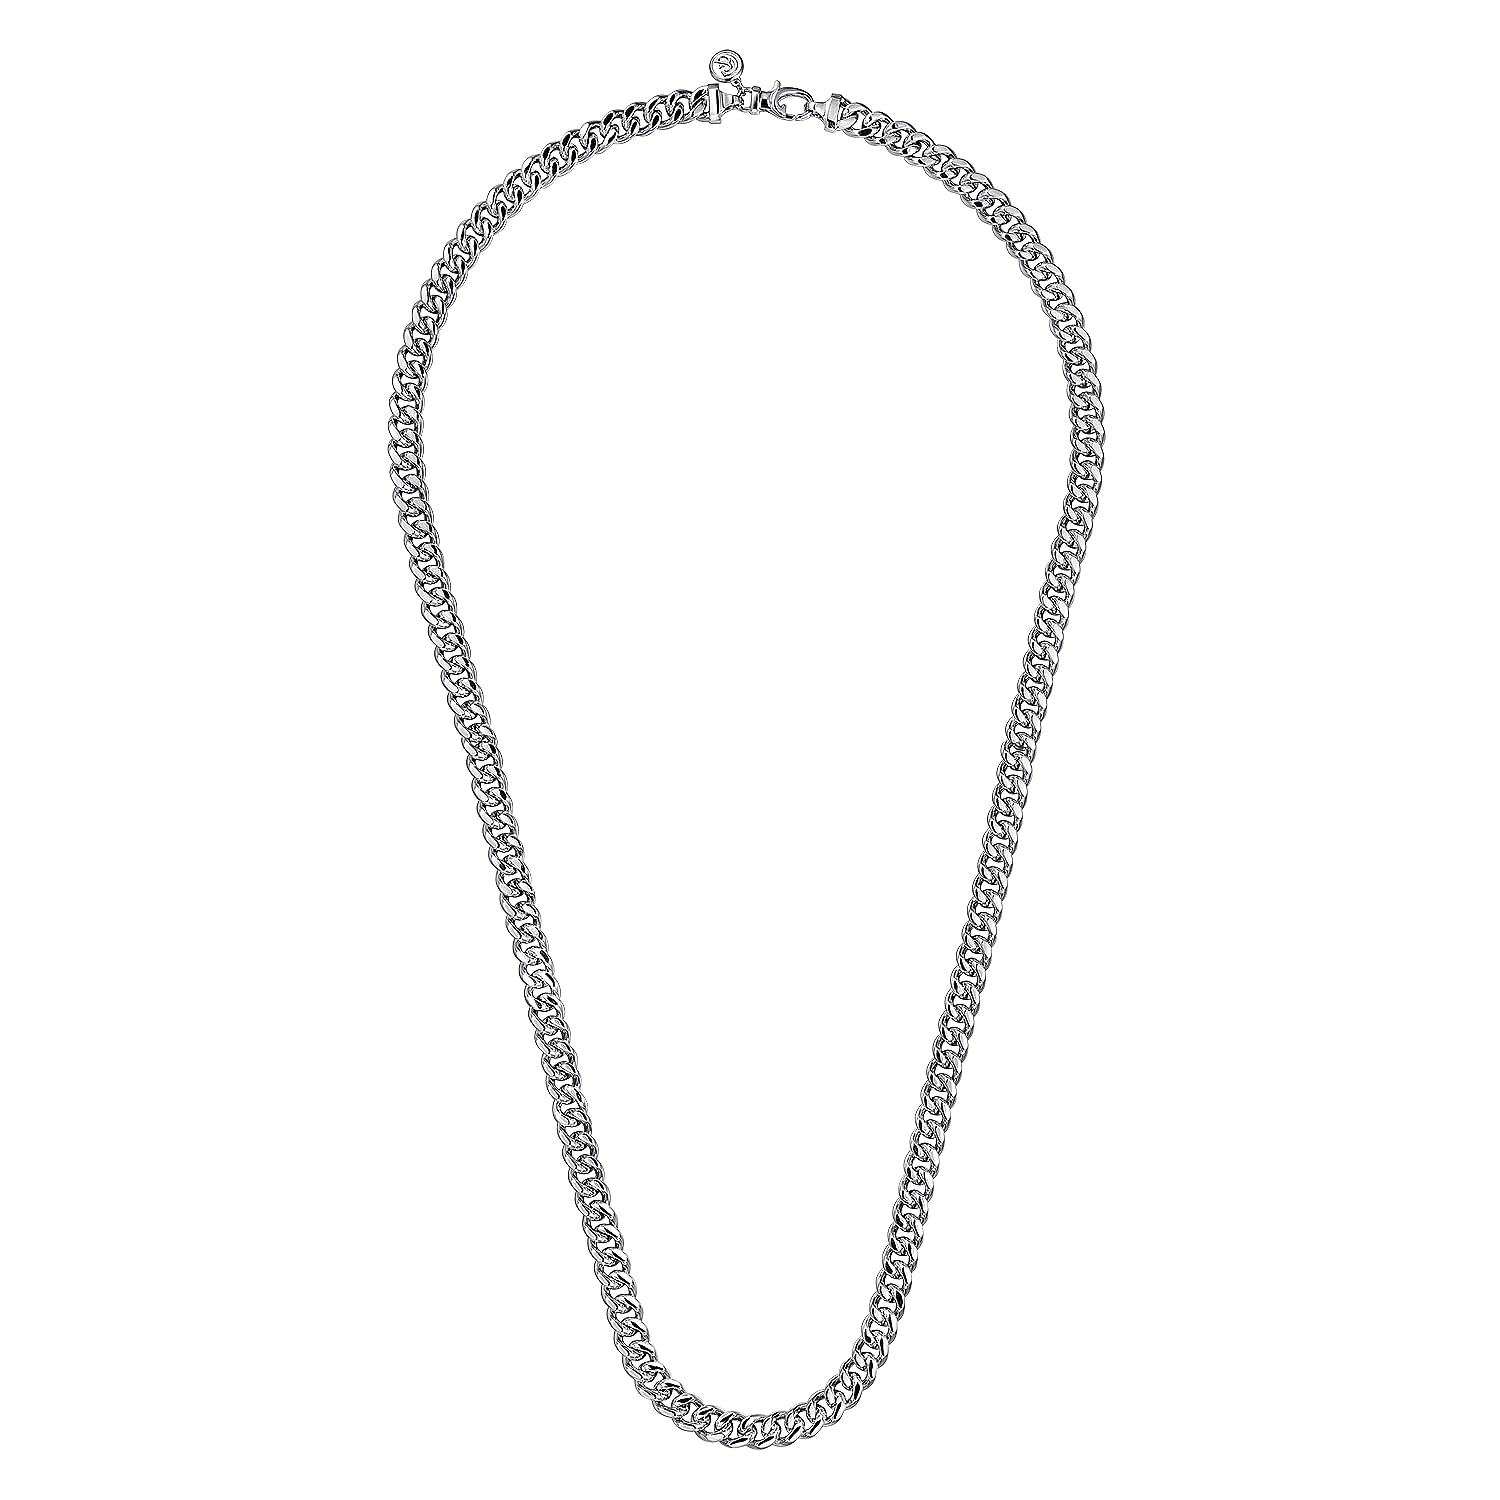 24 Inch 7mm 925 Sterling Silver Solid Men's Diamond Cut Chain Link Necklace